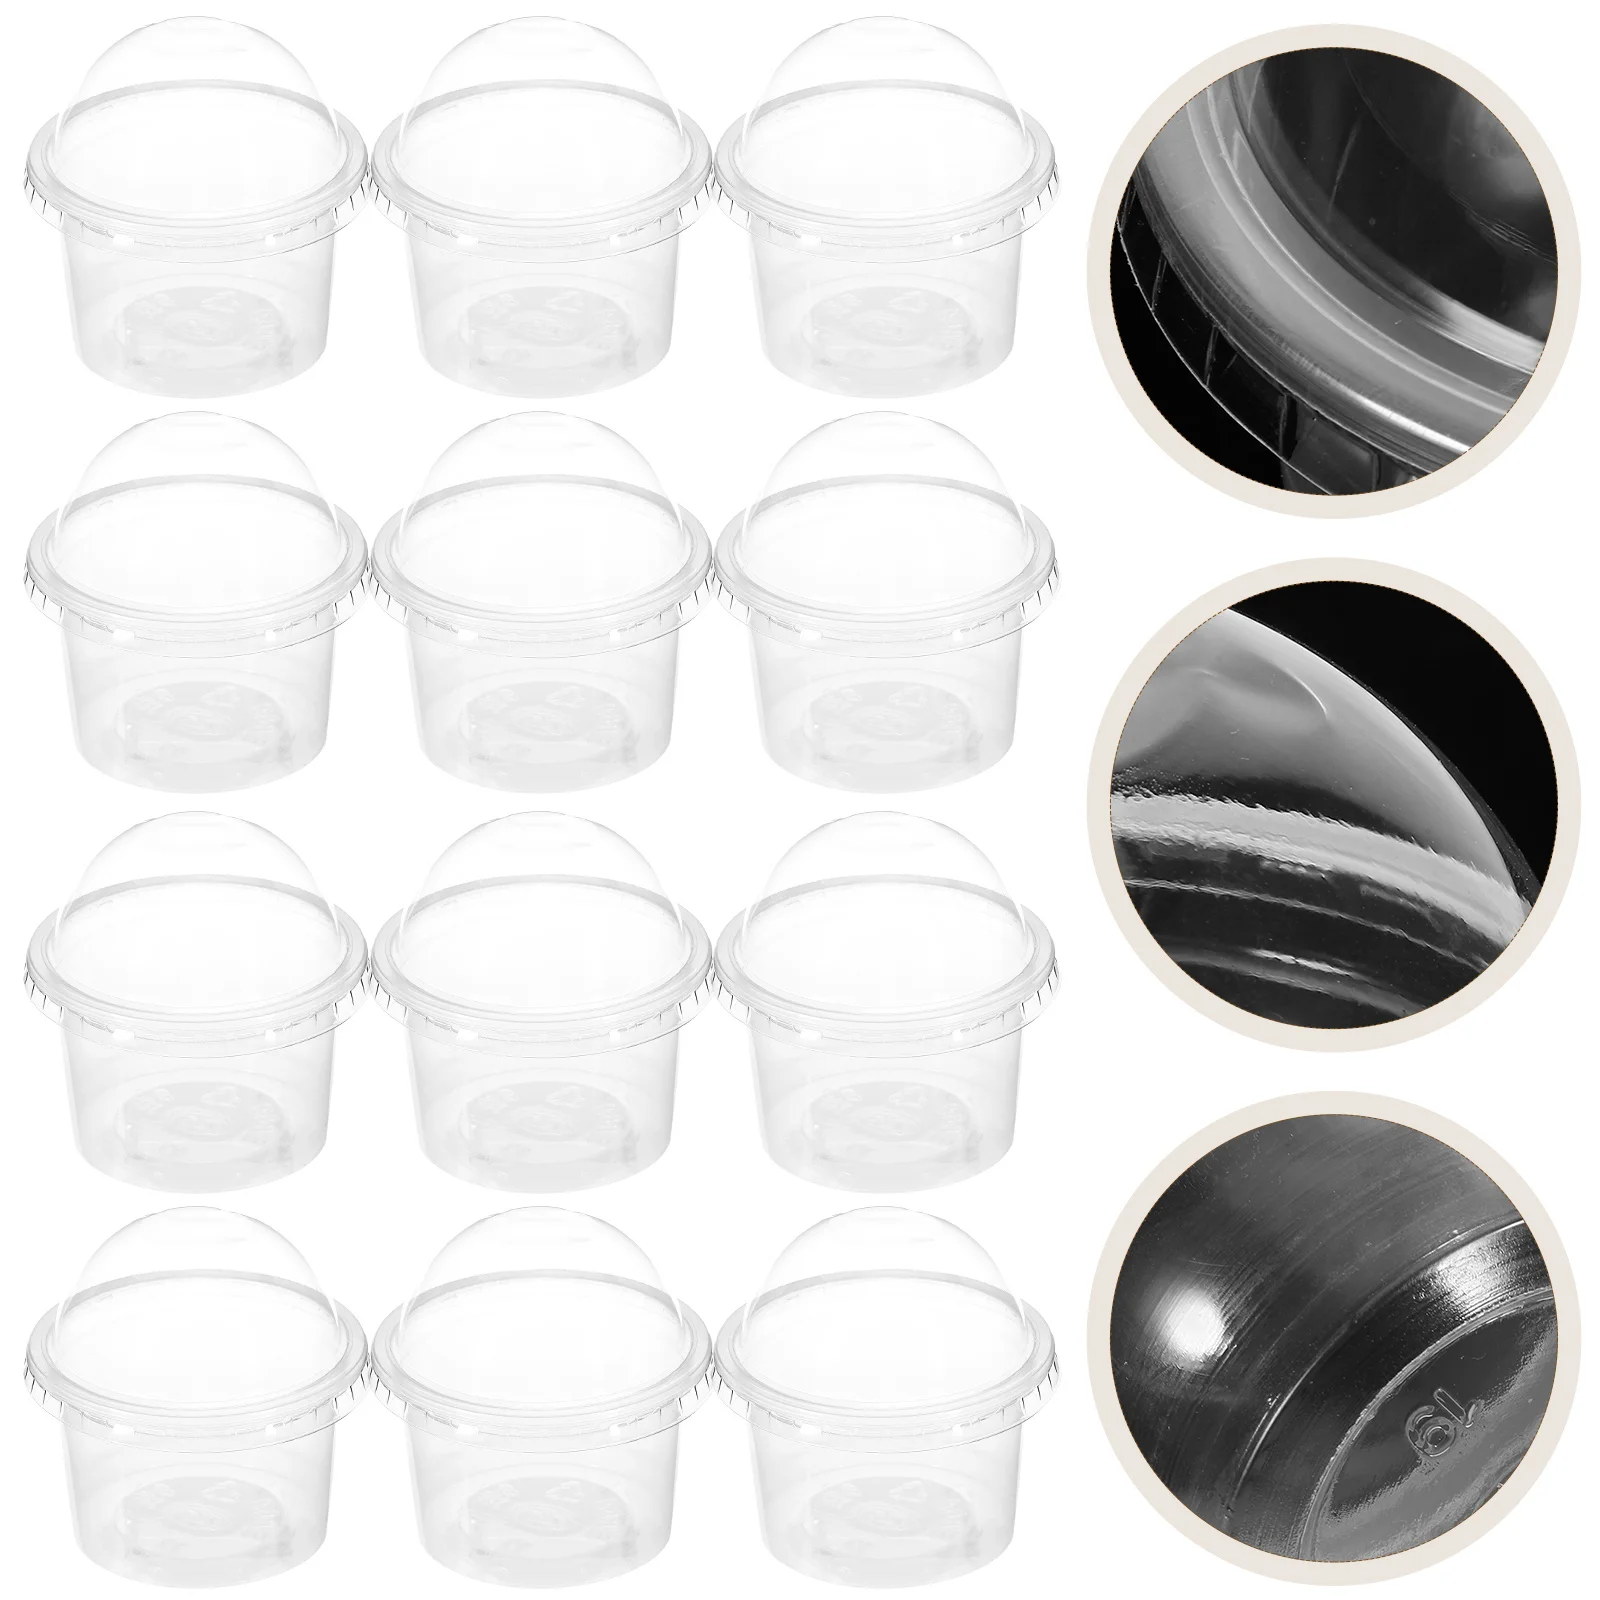 

100 Pcs Plastic Ice Cream Bowls Pudding Cups Food Container Disposable Containers Lids Yogurt Dessert Store